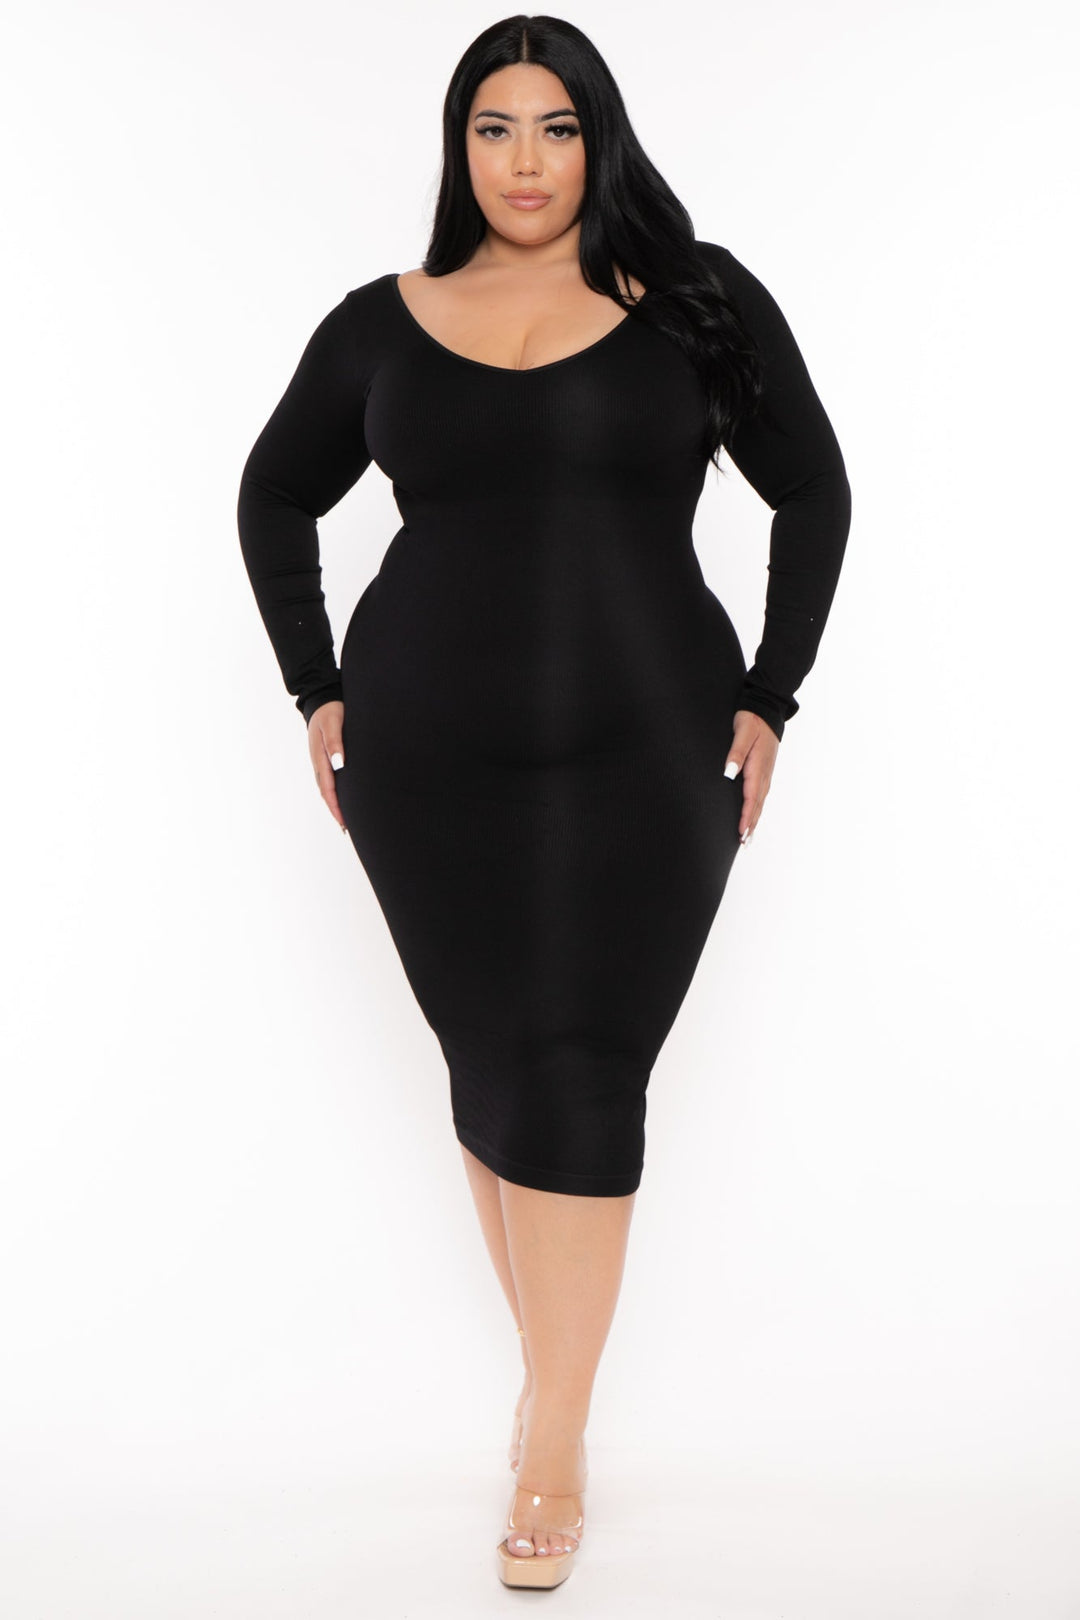 Plus Size Shapewear Before And After - Shop on Pinterest